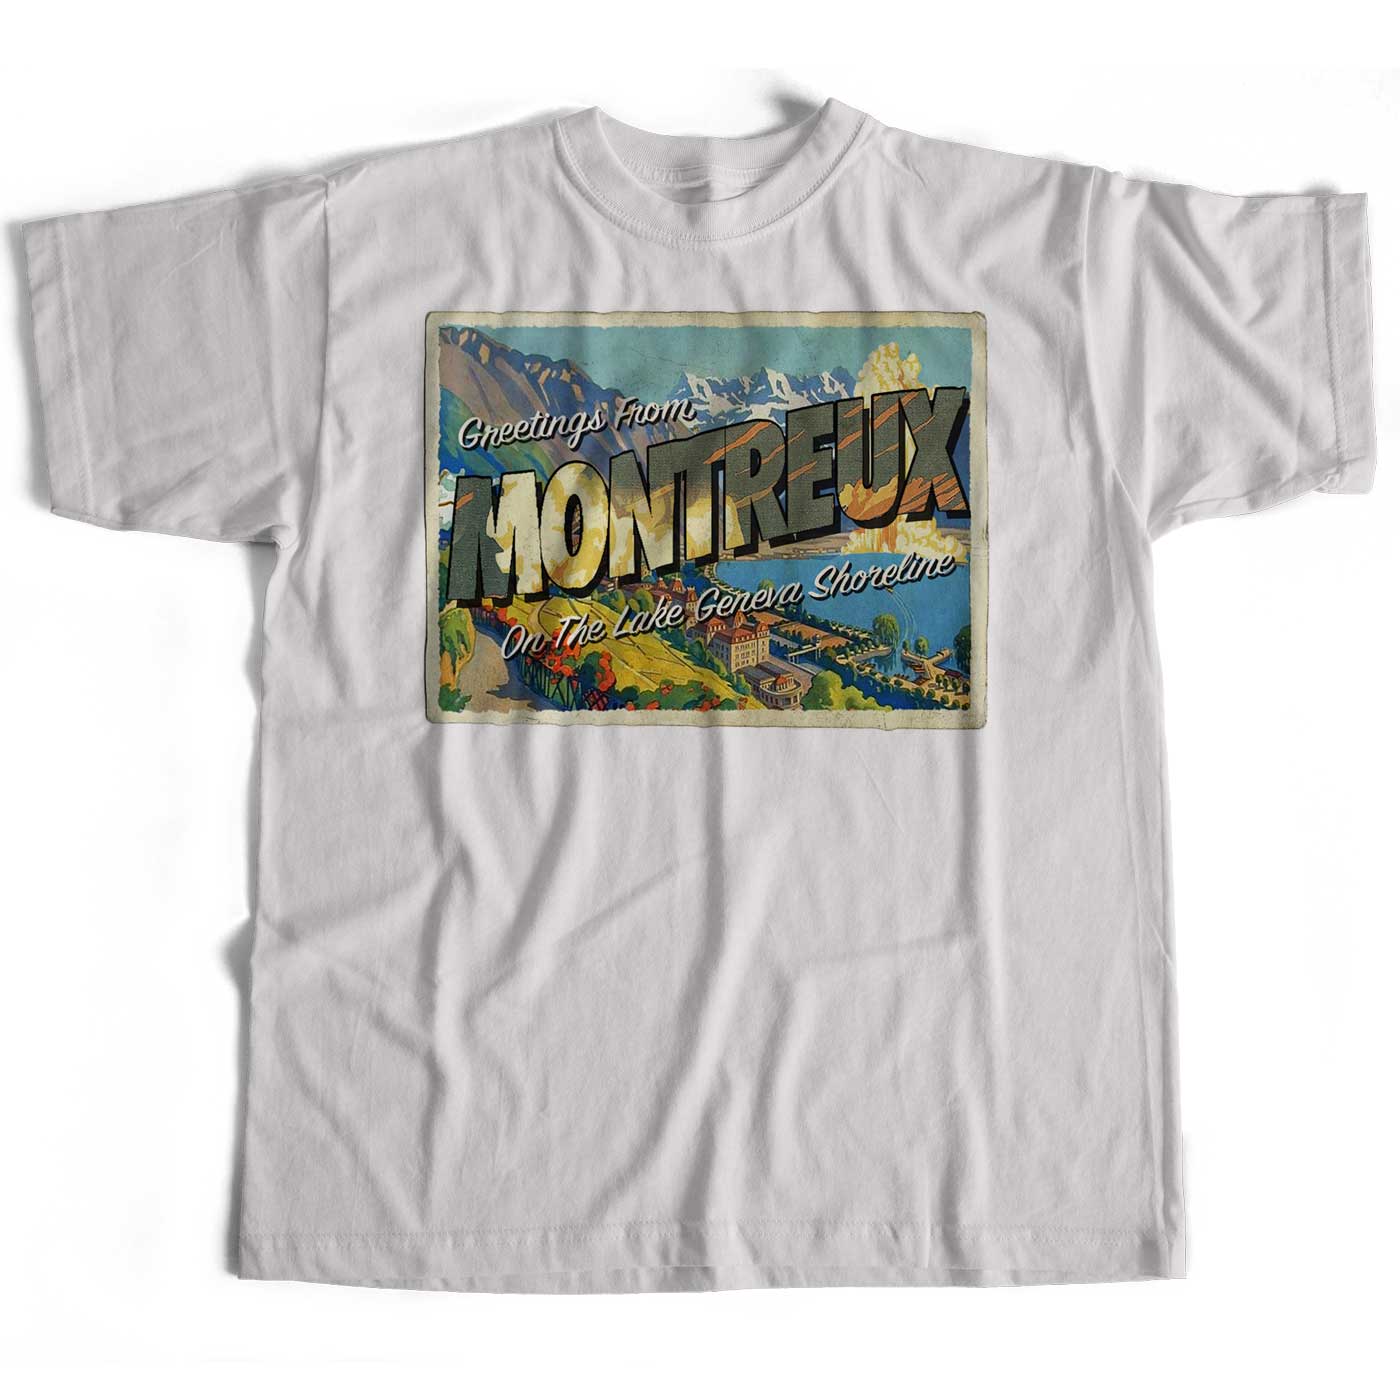 Greetings From Montreux T Shirt - On The Lake Geneva Shoreline An Old Skool Hooligans Rock Postcard